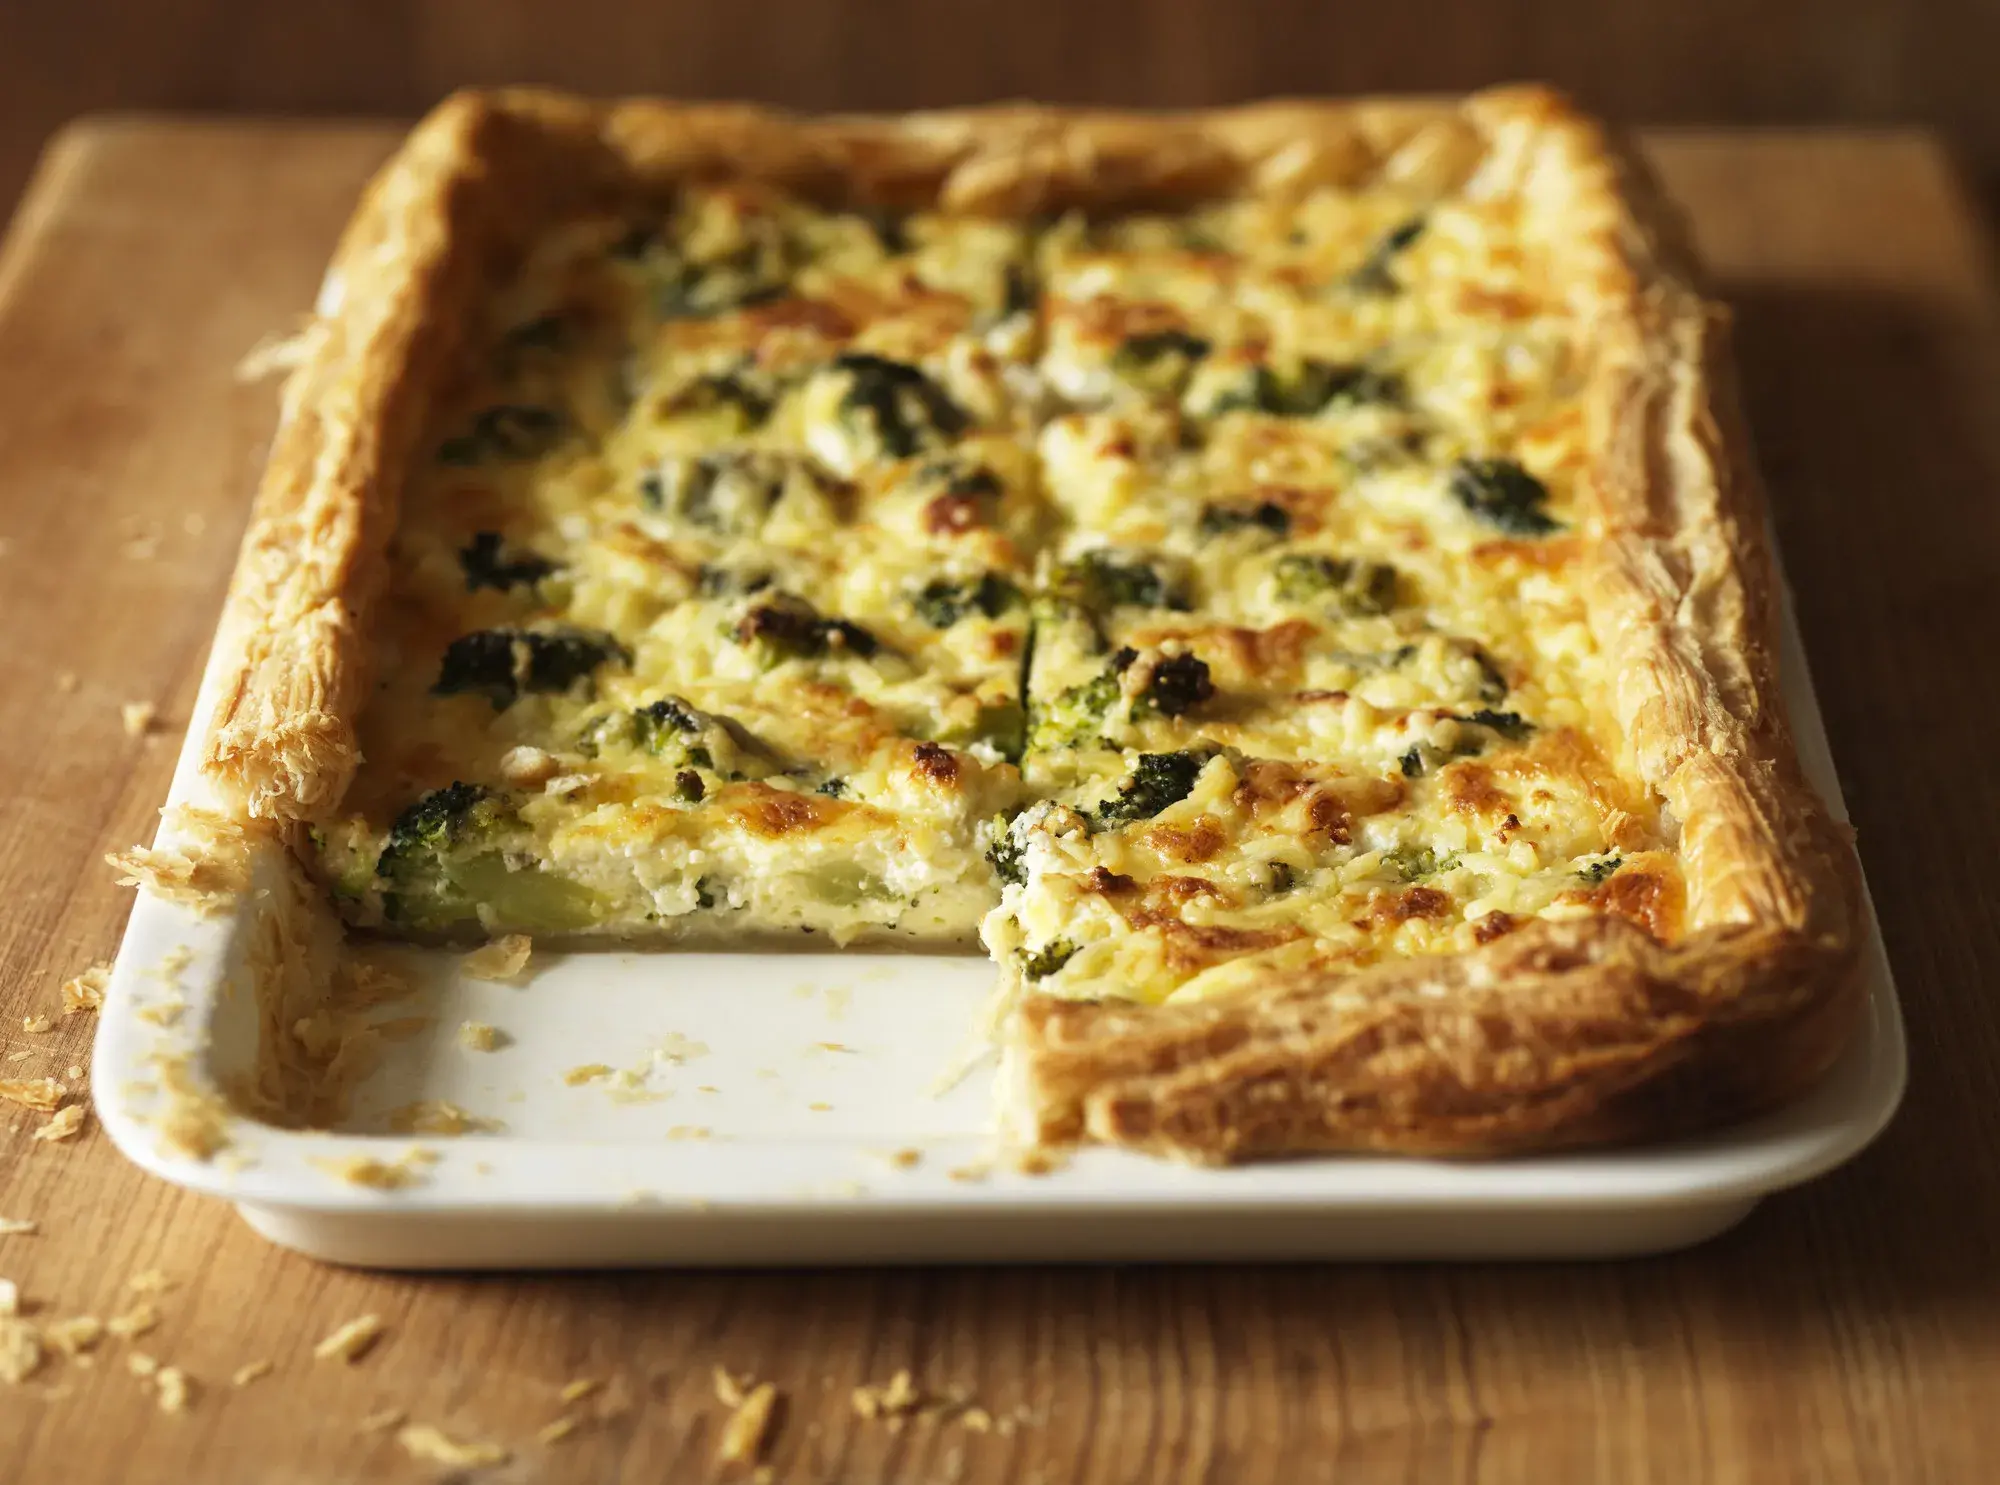 Broccoli and Goats' Cheese Tart